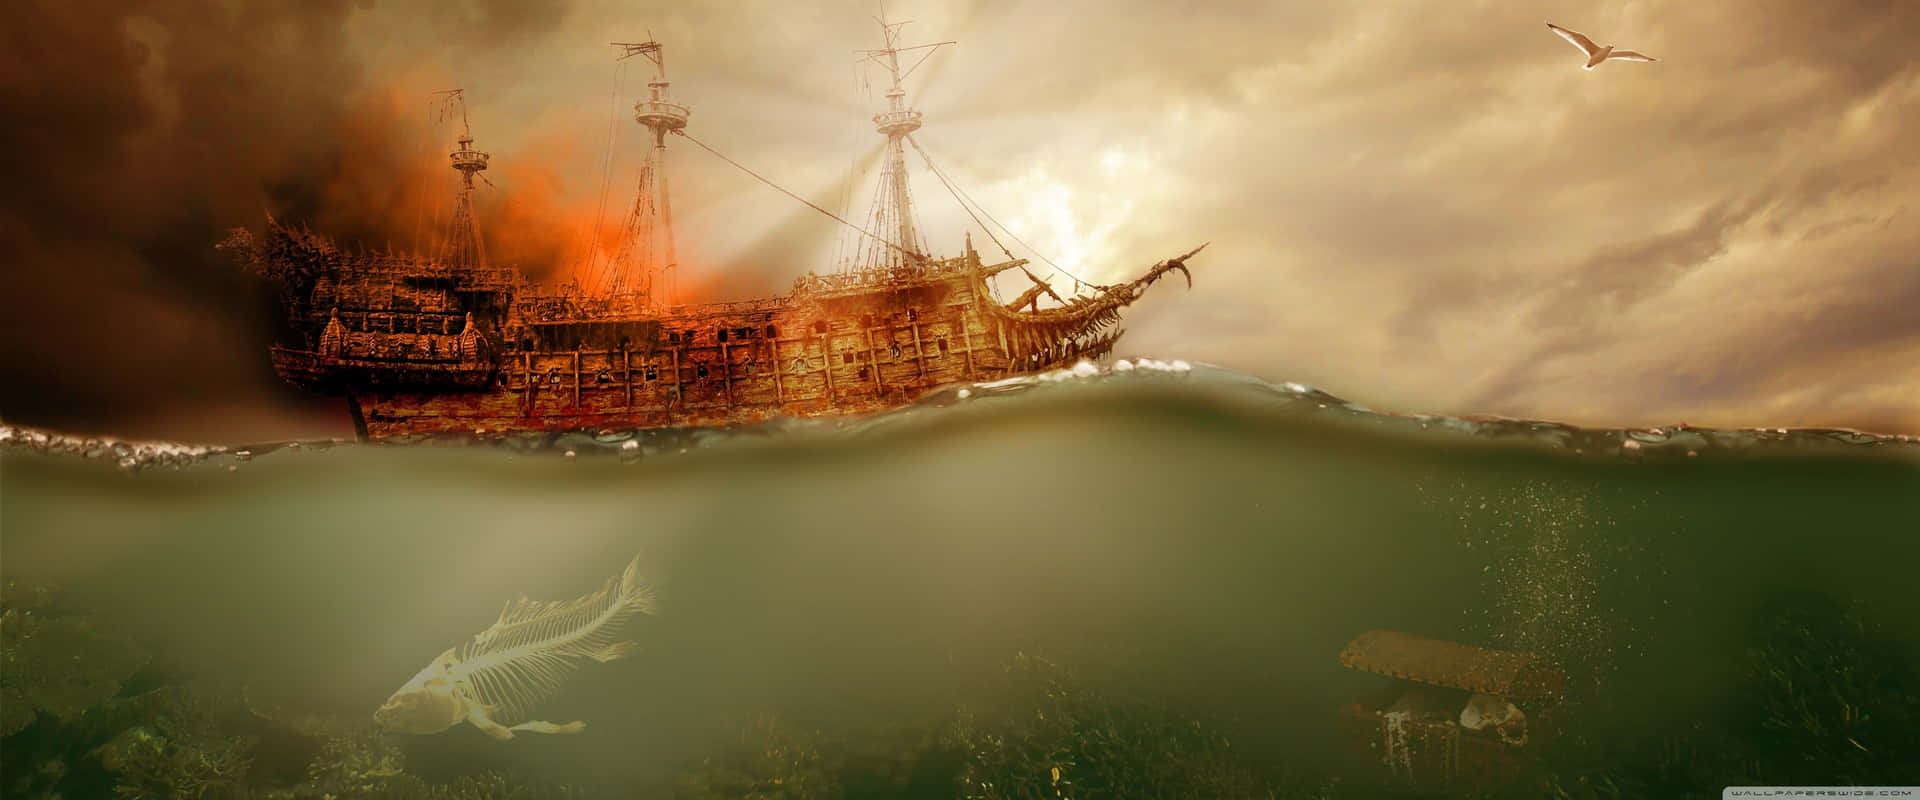 A Ship Is Floating In The Ocean With A Fish In The Water Wallpaper